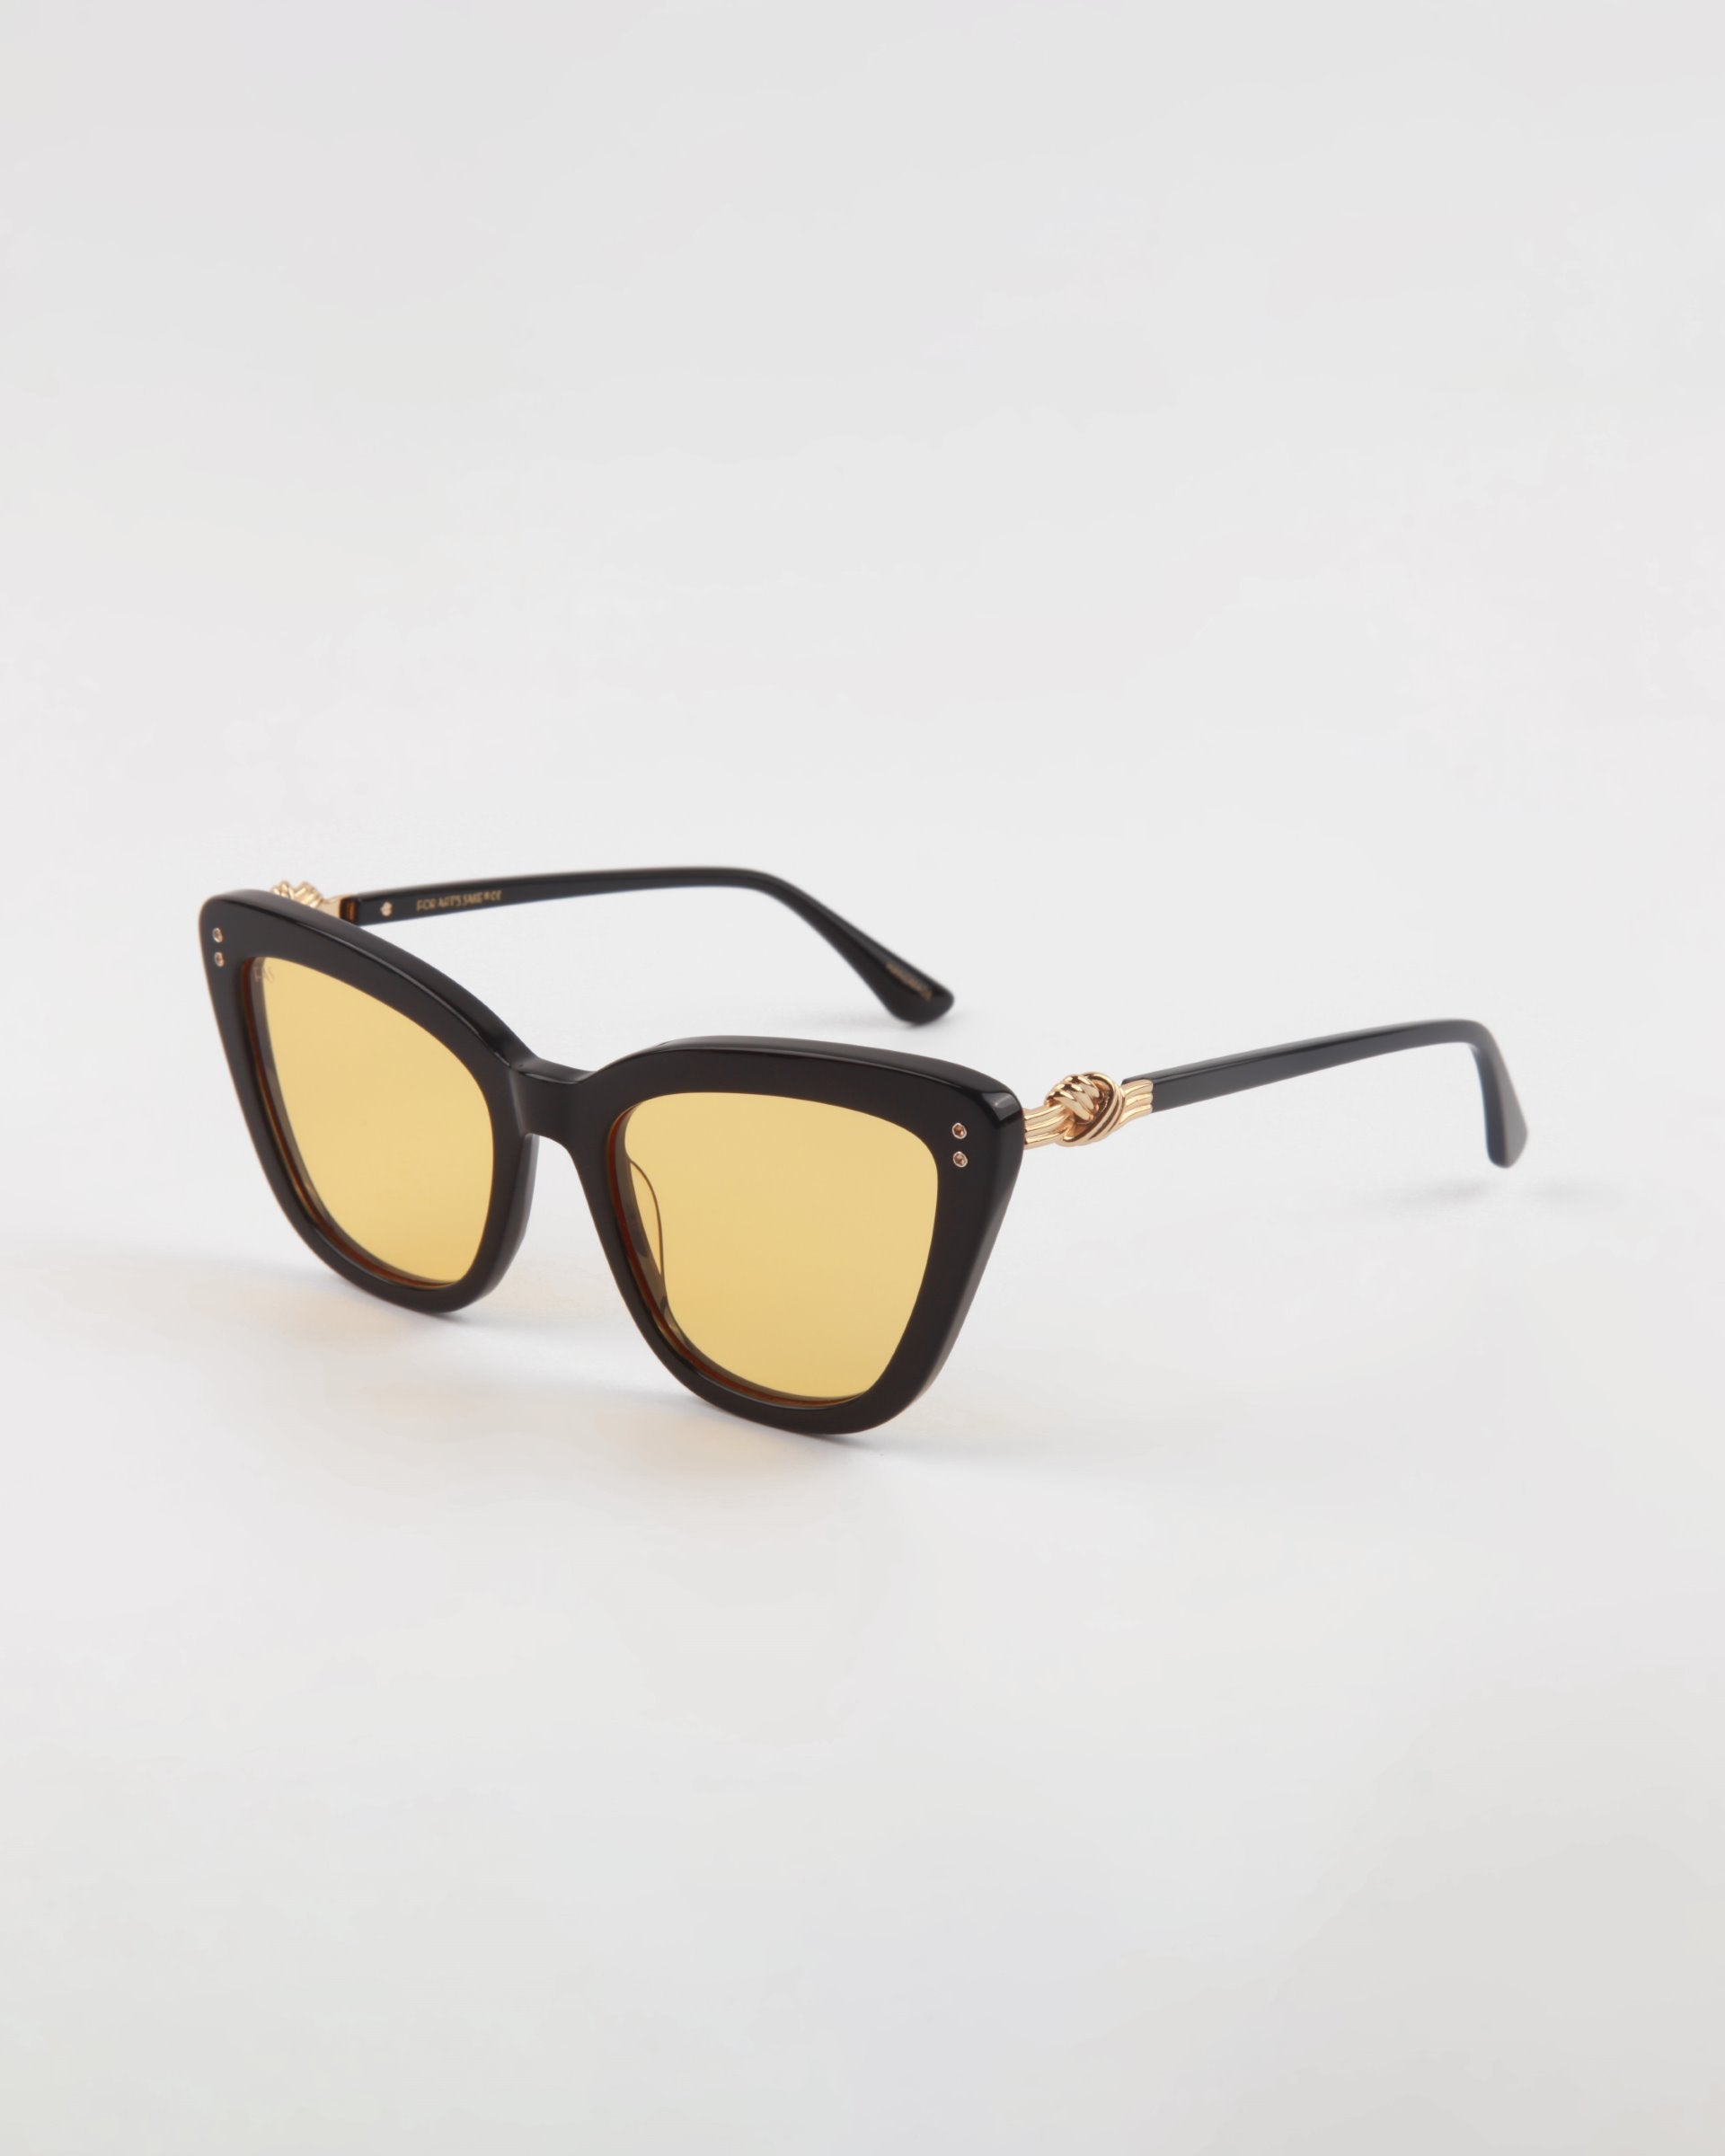 Ice Cream by For Art&#39;s Sake® with black handmade acetate cat-eye frames and yellow-tinted lenses. The frames feature gold decorative elements on the hinges, providing both style and essential UVA &amp; UVB protection. These chic glasses are elegantly displayed on a minimalist white background.